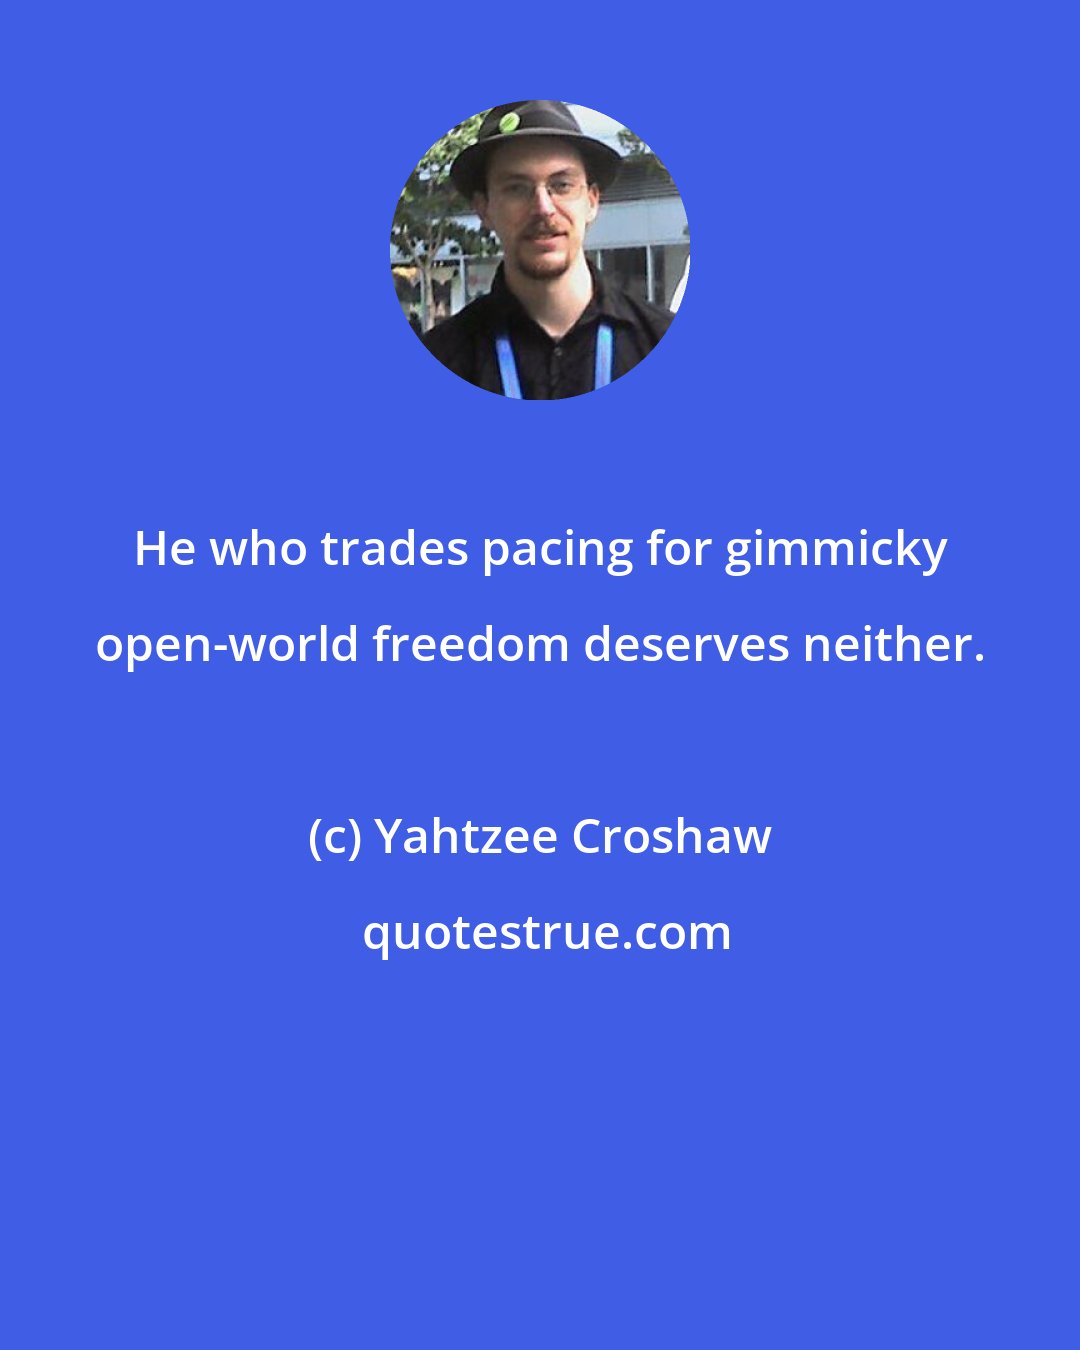 Yahtzee Croshaw: He who trades pacing for gimmicky open-world freedom deserves neither.